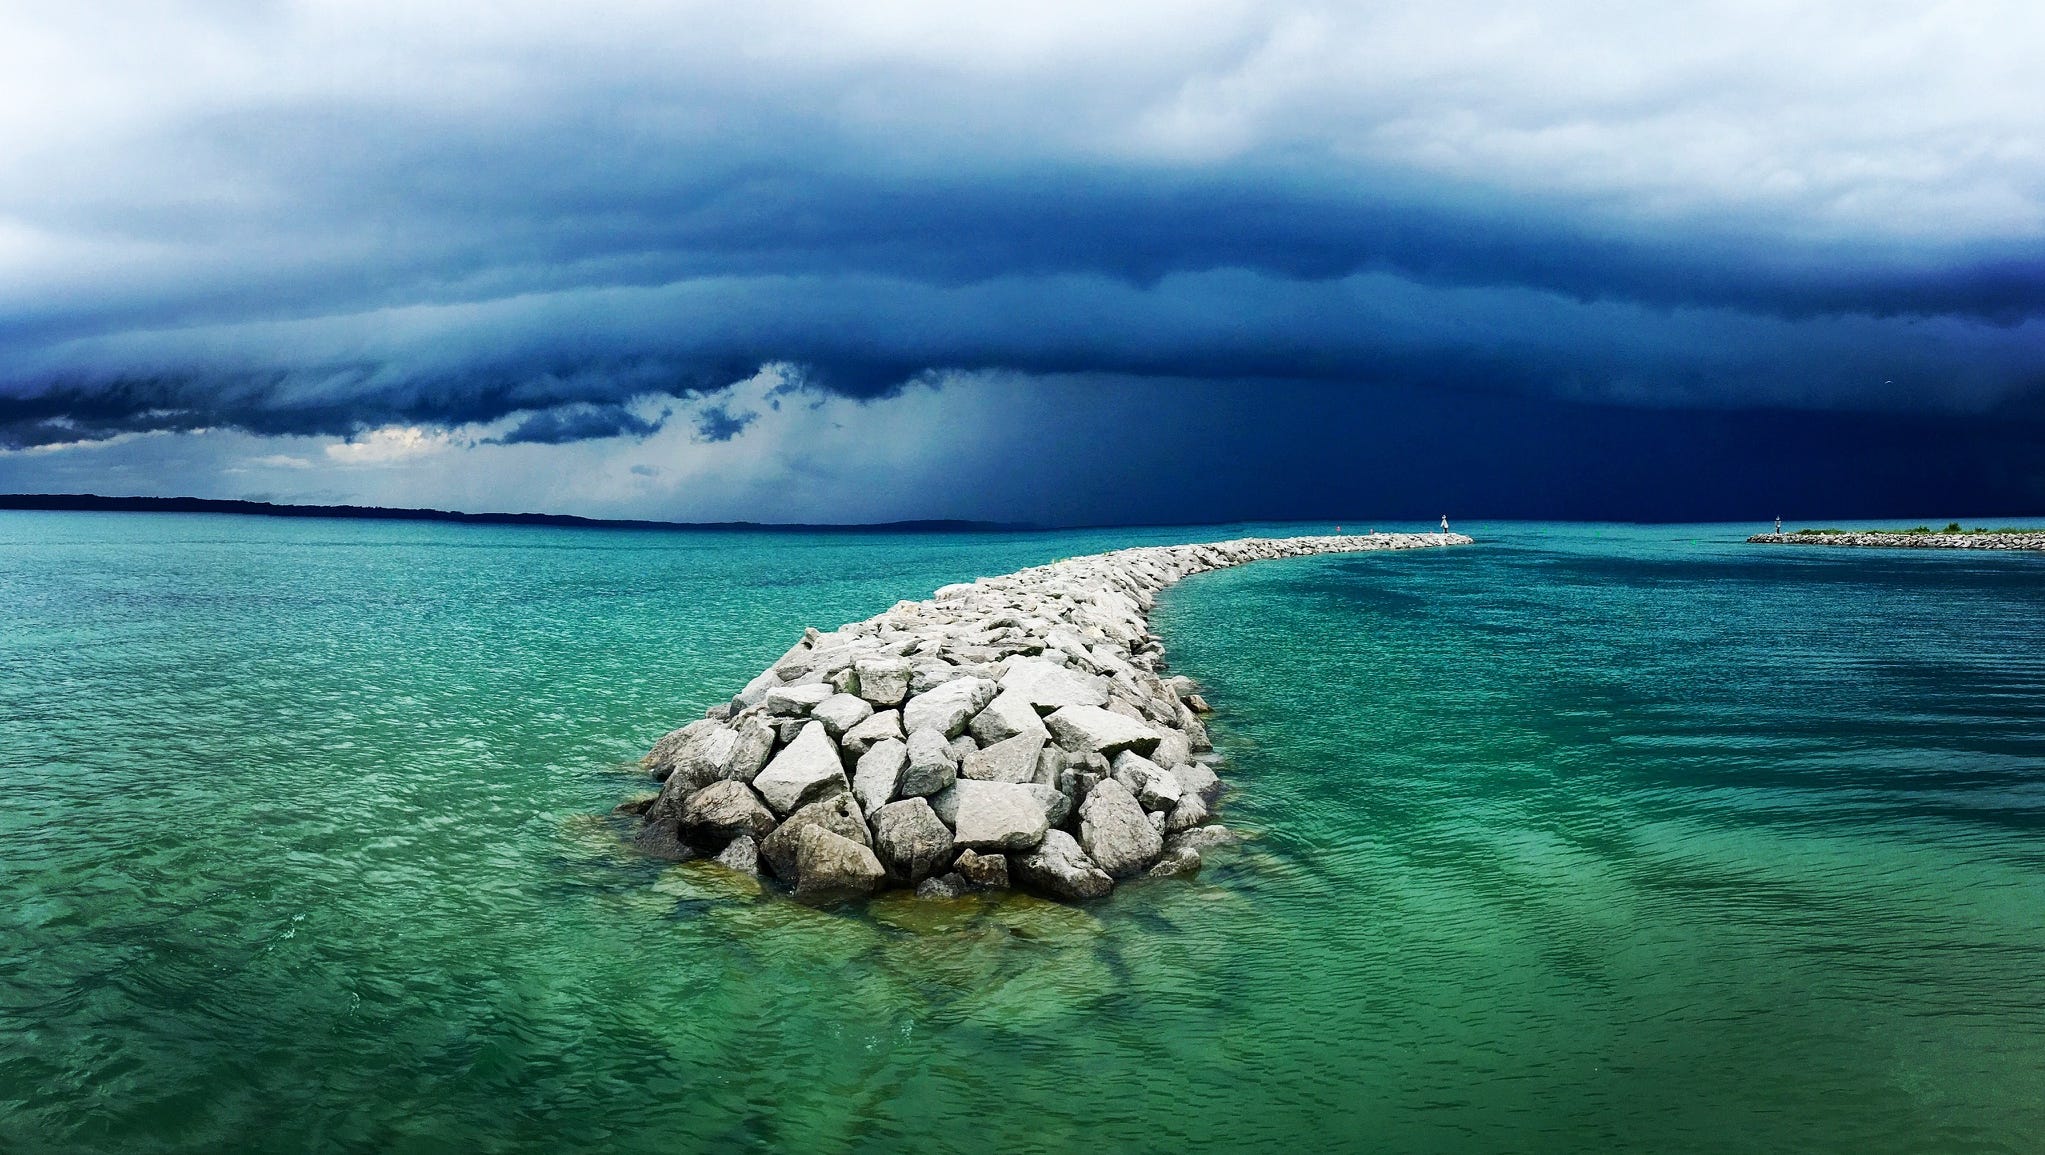 Honorable Mention: A stone pier in Elk Rapids cuts through the green waters of Traverse Bay in "Storm Rolling Away on Traverse Bay," by Rick Motyl of Troy. This was also a finalist in the digitally enhanced category.